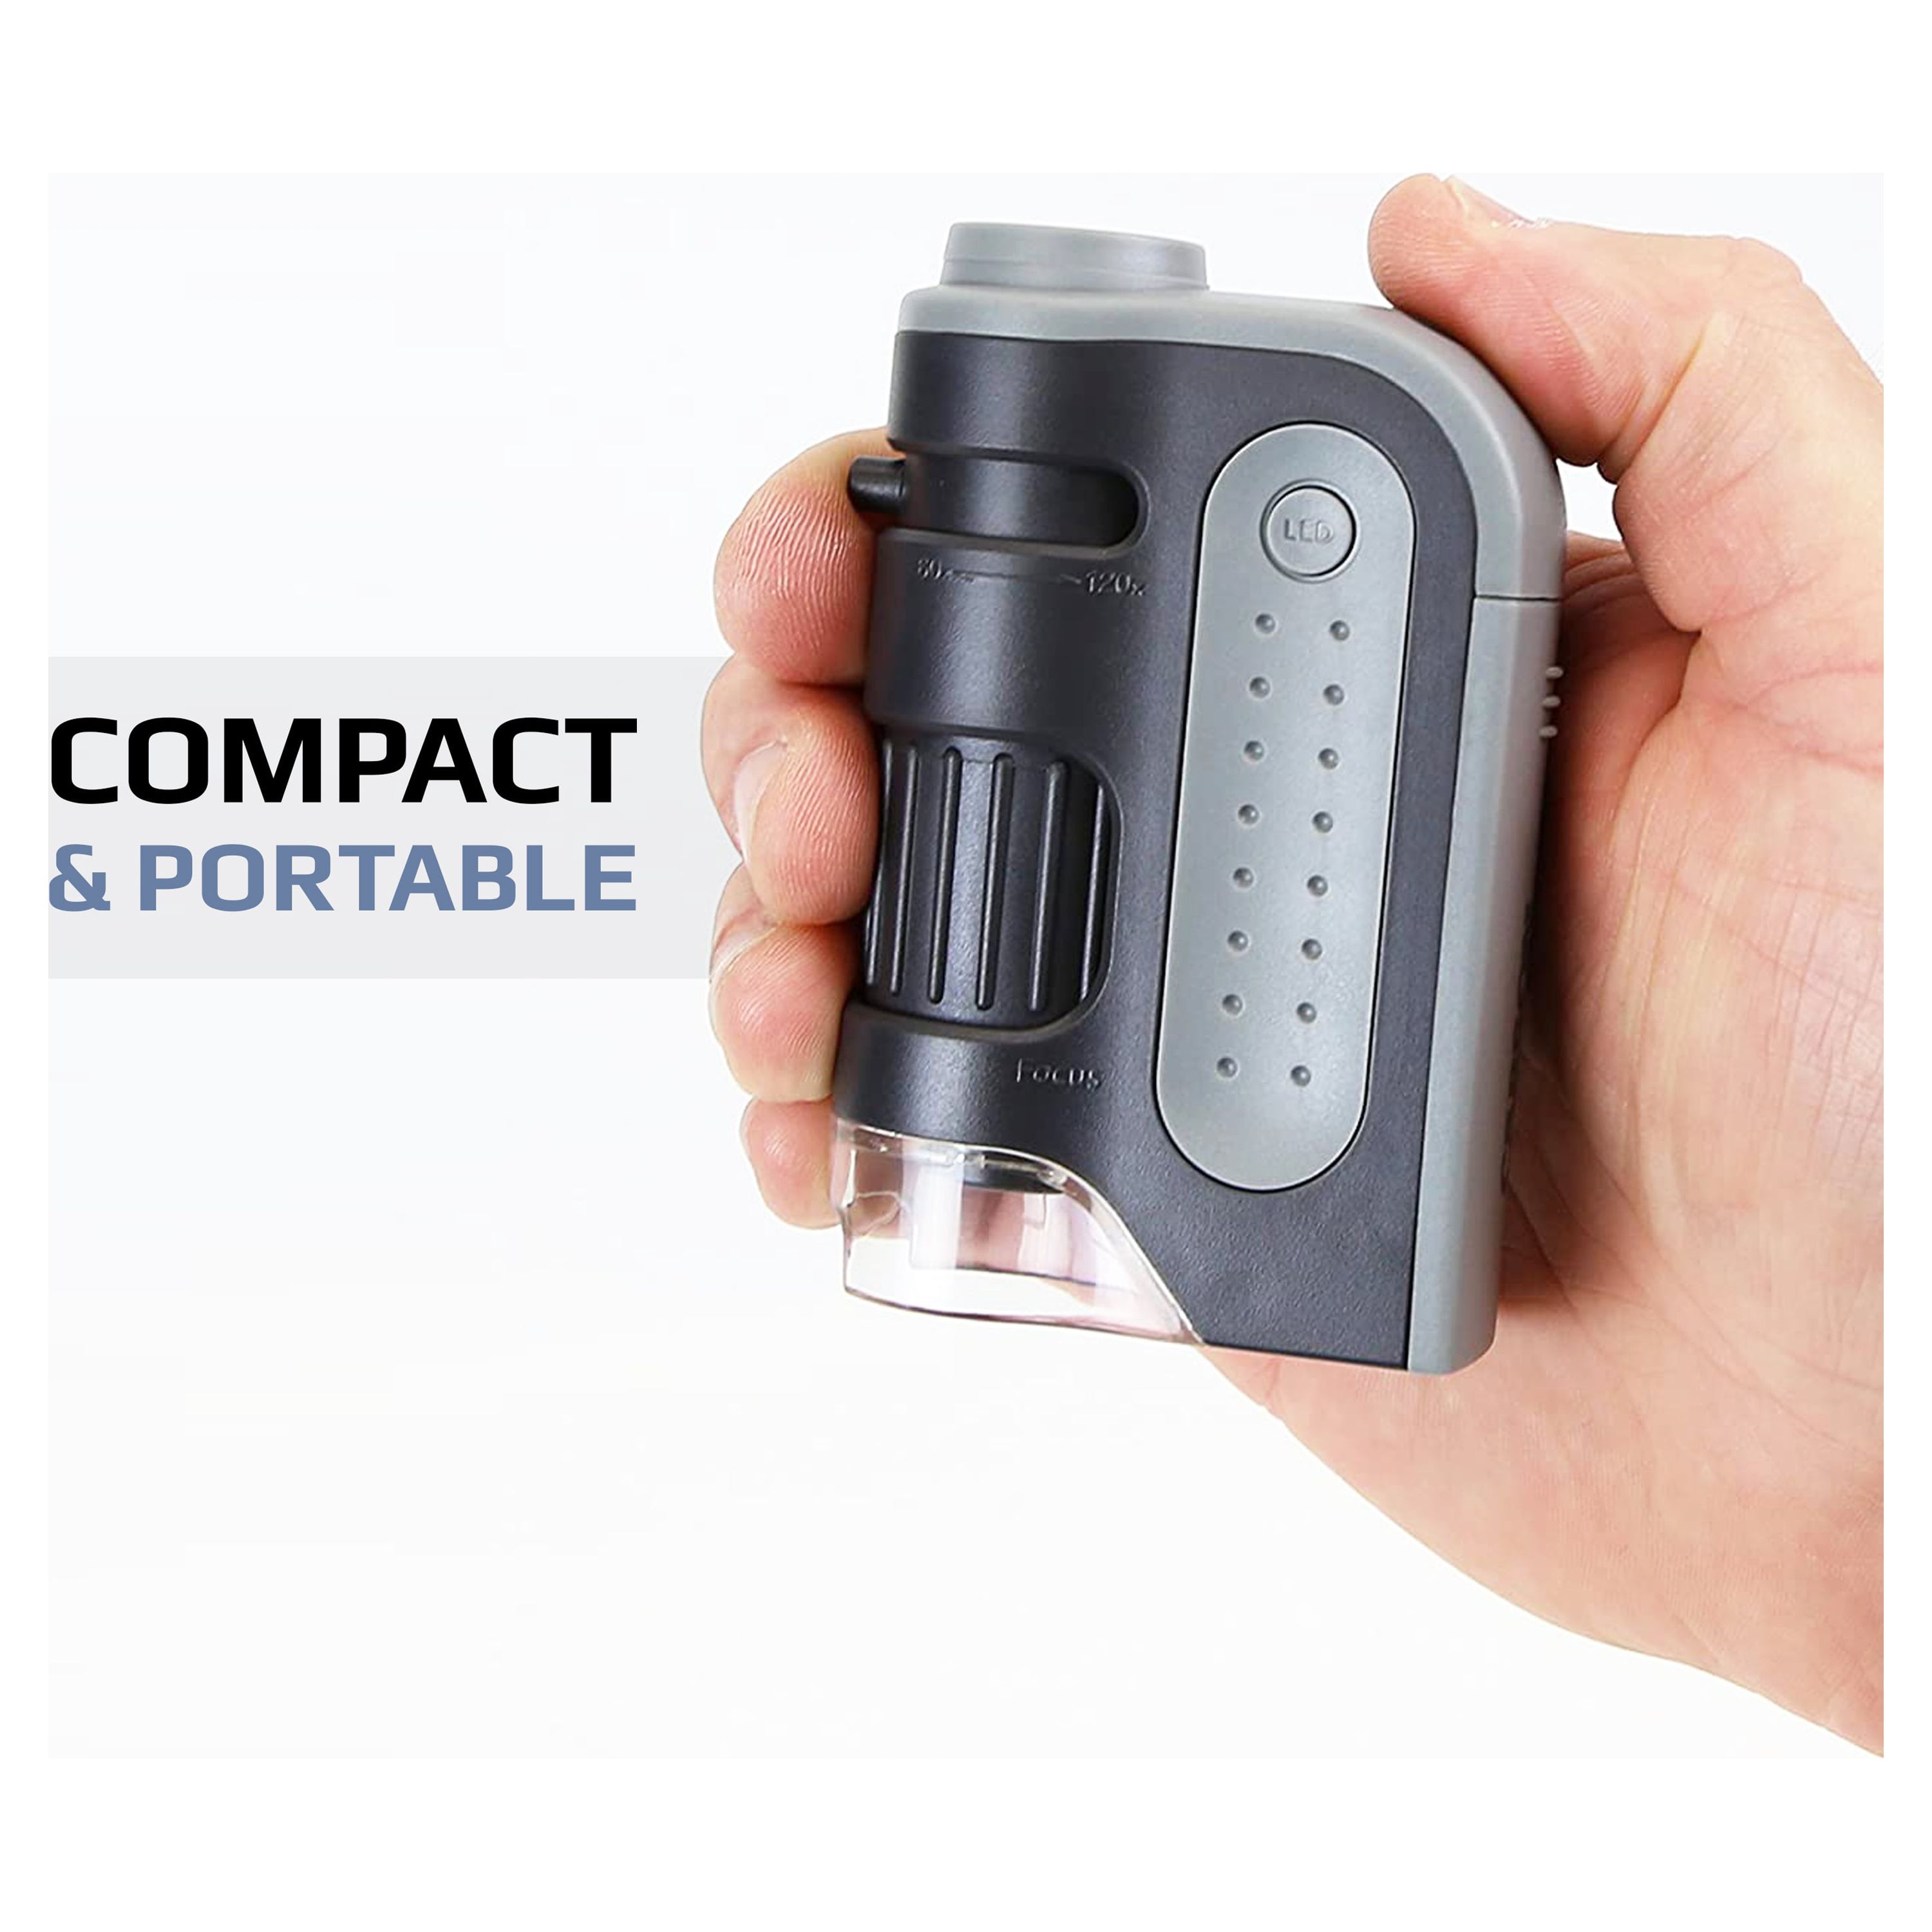 Carson MicroBrite™ Plus 60x - 120x LED Lighted Portable Pocket Microscope for Kids & Adults - image 8 of 9